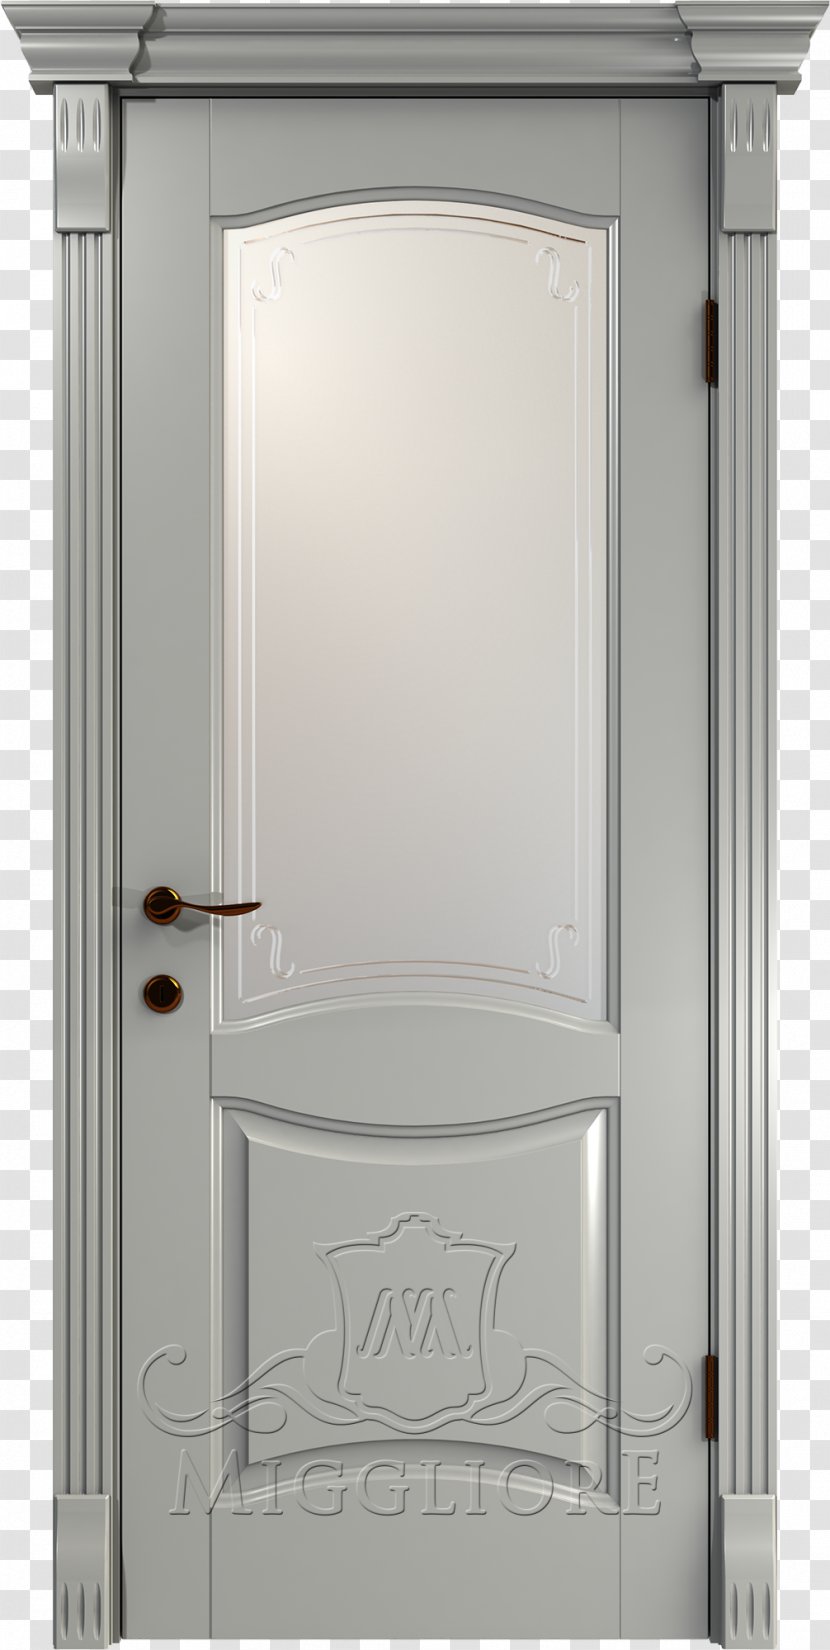 MIGGLIORE Door White Online Shopping Color Transparent PNG